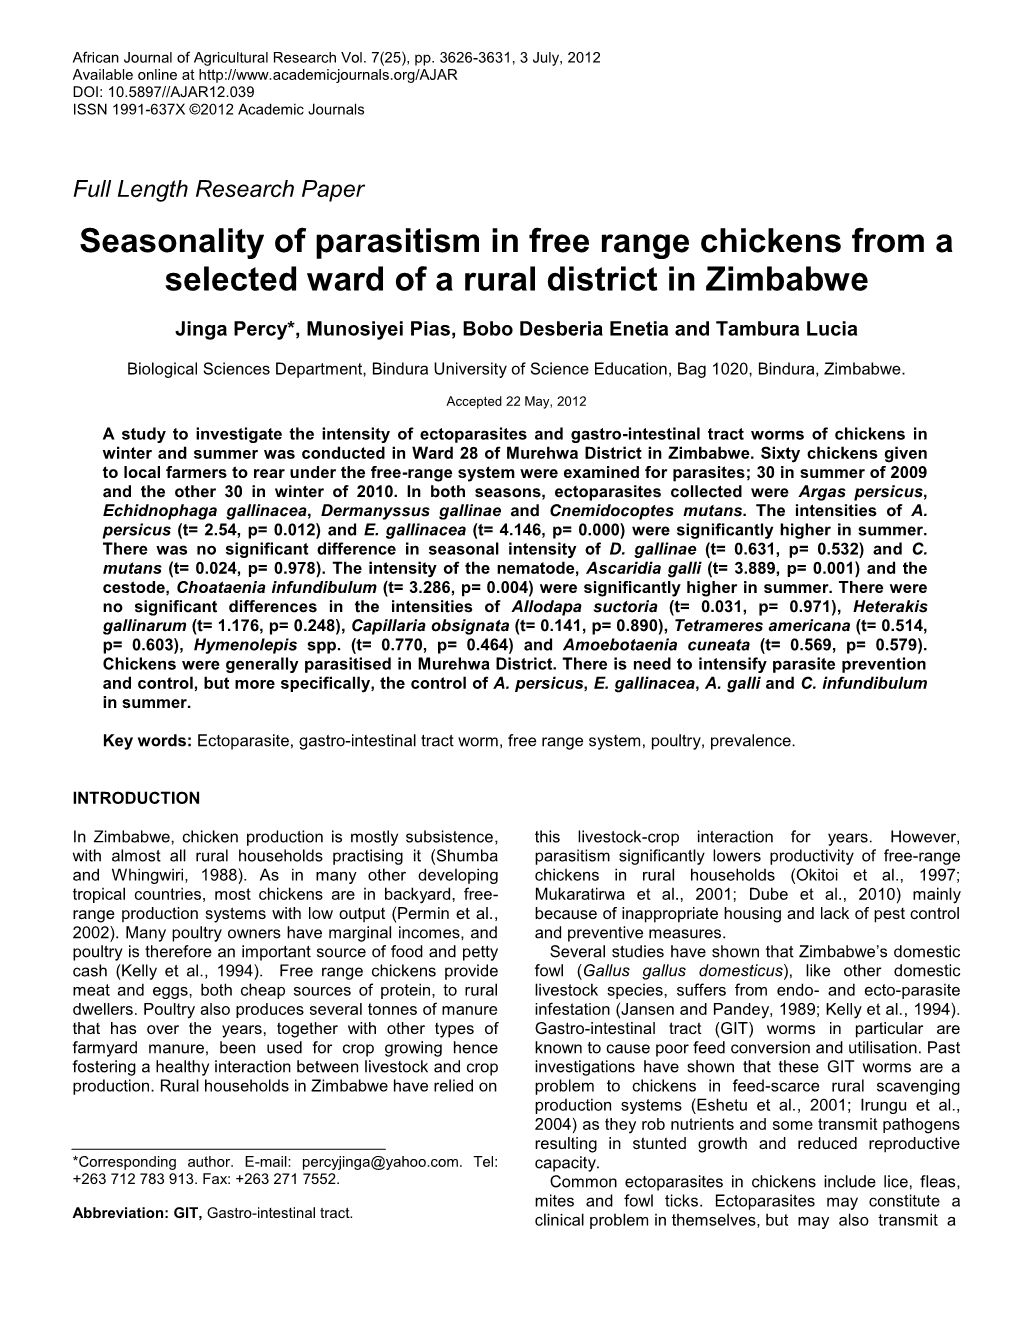 Seasonality of Parasitism in Free Range Chickens from a Selected Ward of a Rural District in Zimbabwe